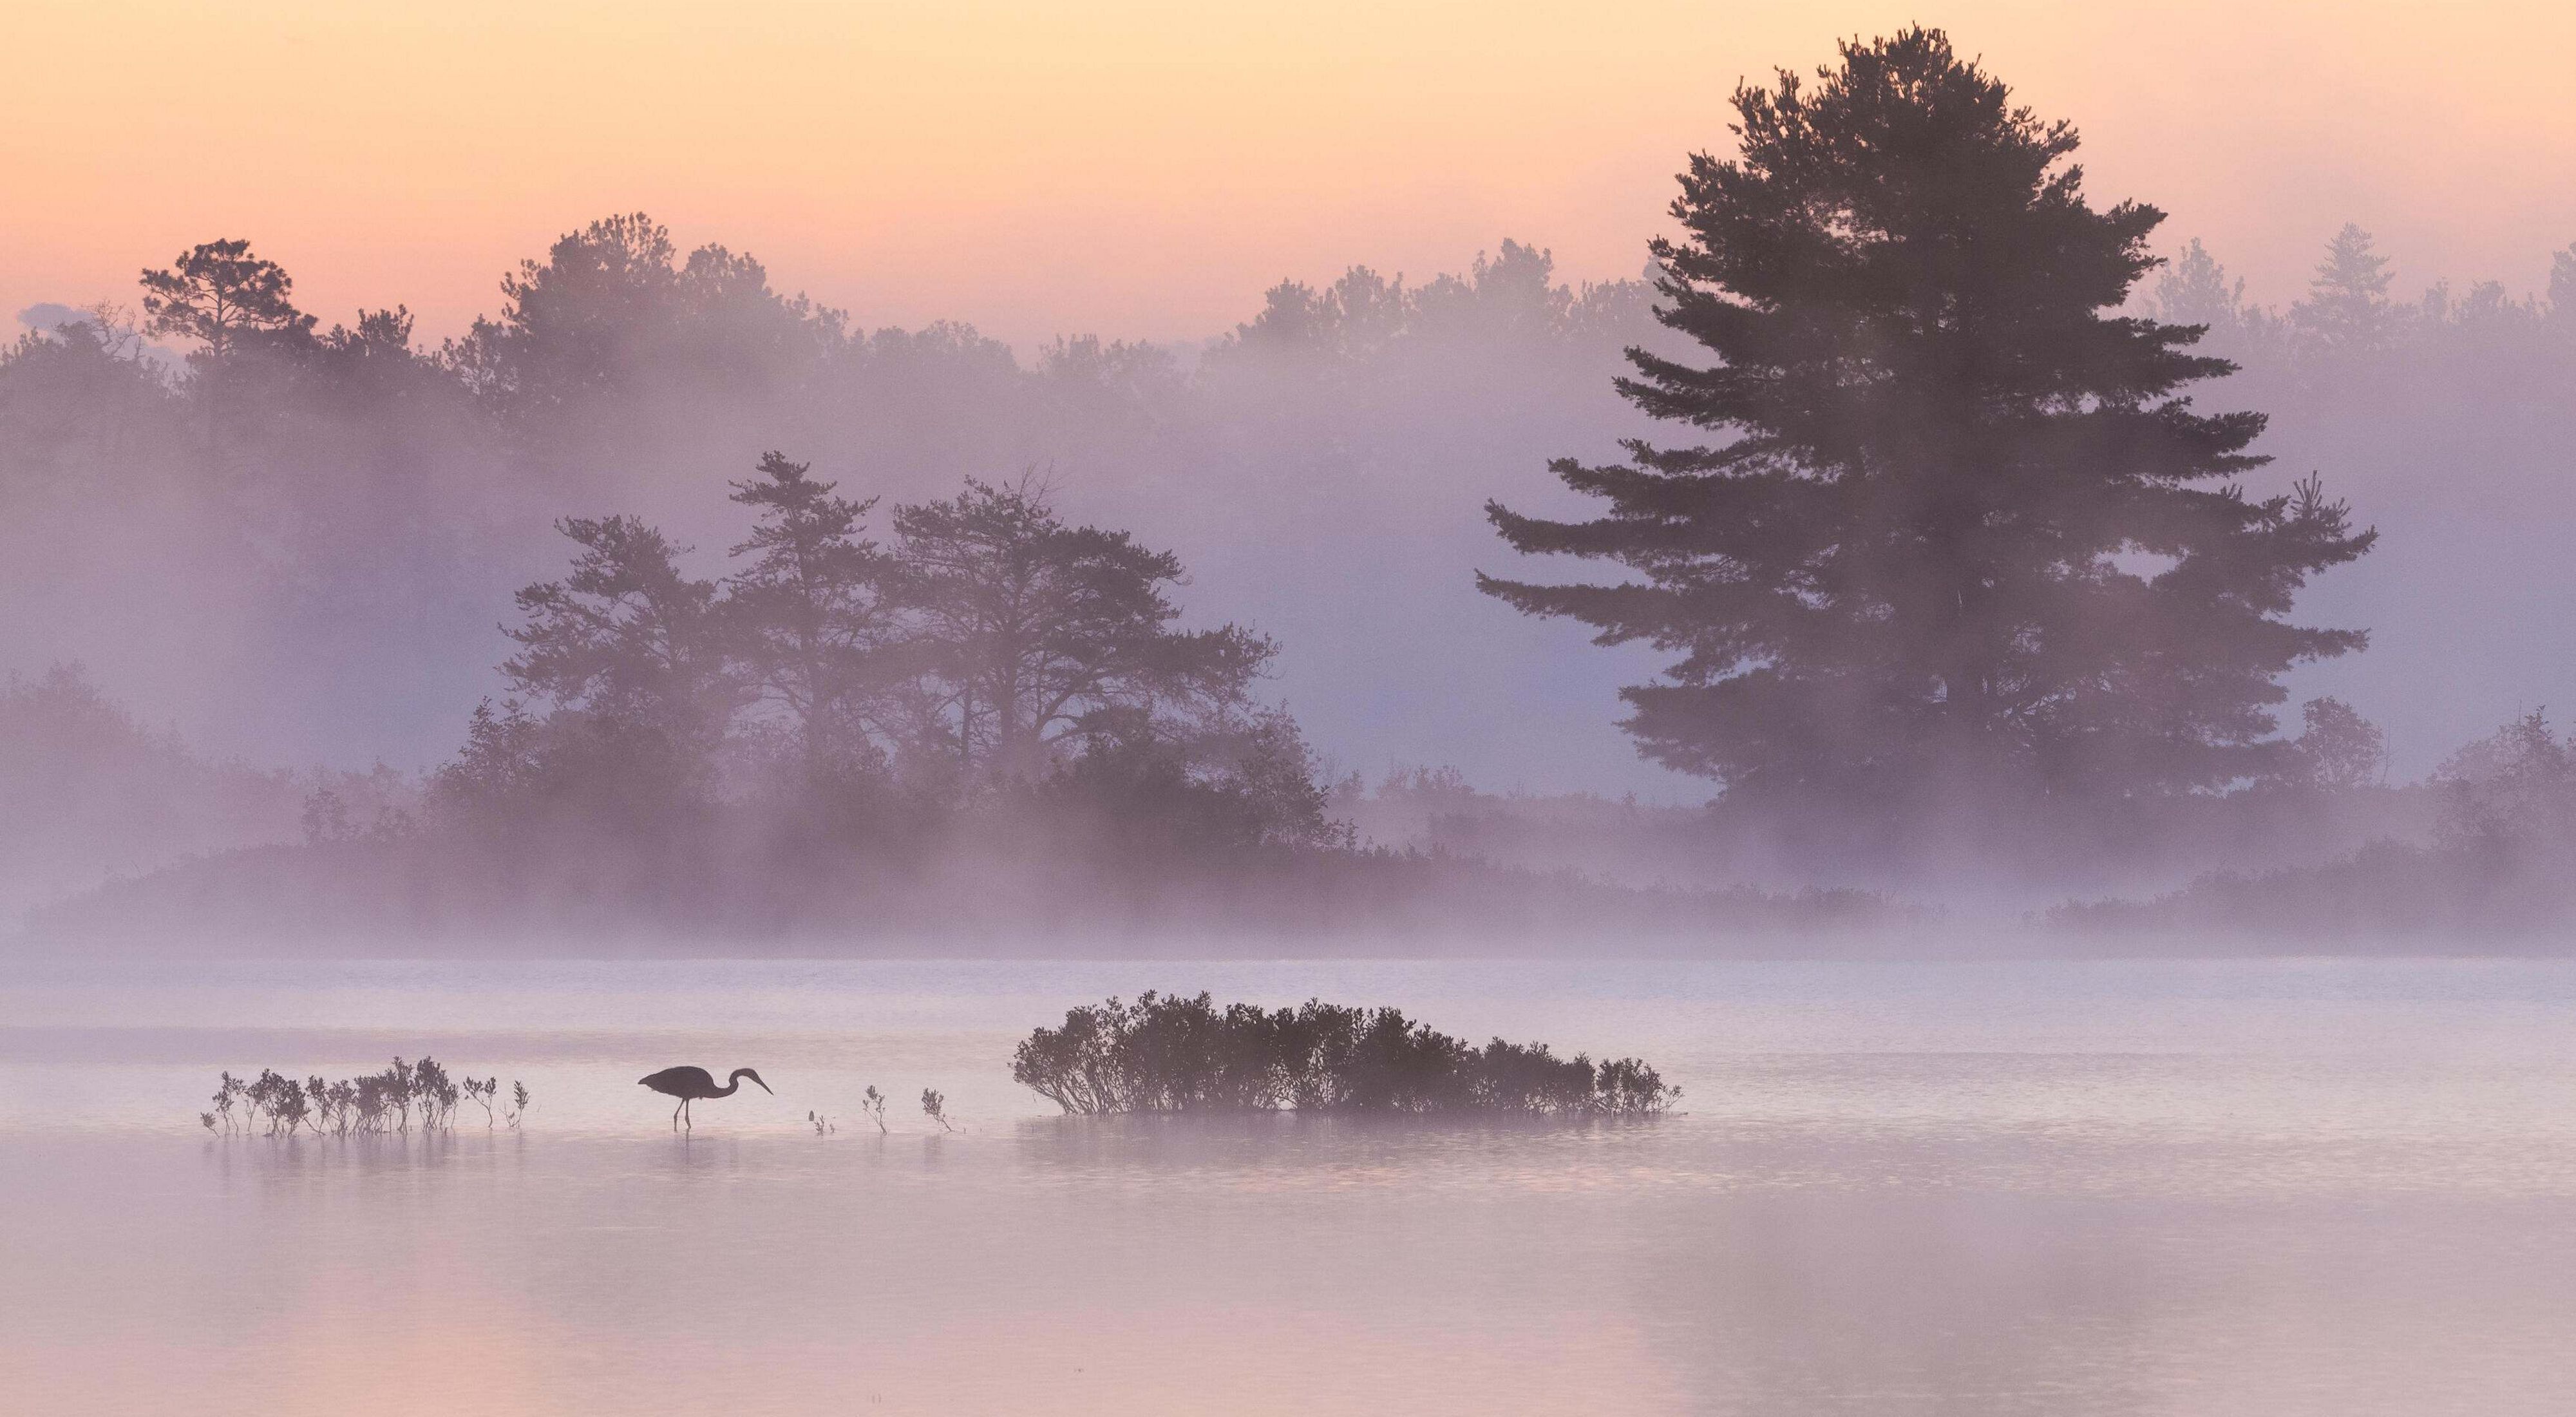 A great blue heron fishes at dawn at Seney National Wildlife Refuge in Michigan's Upper Peninsula on a foggy morning. The sky is pink as the sun rises and reflects in the still water. 